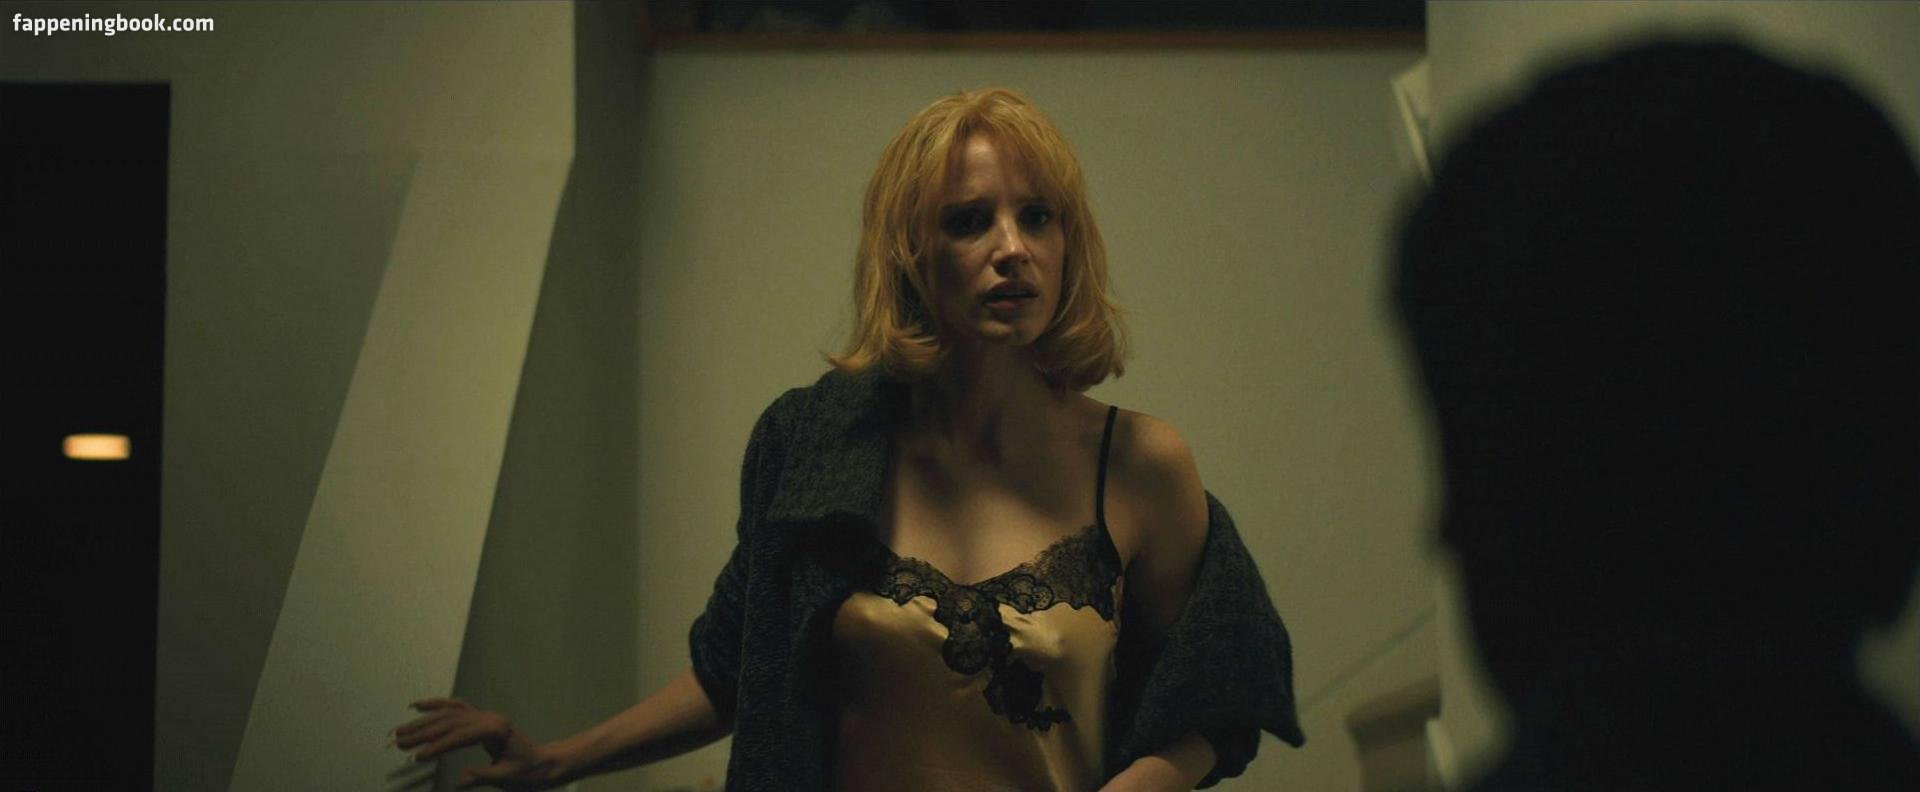 Jessica Chastain Nude, The Fappening - Photo #255591 - FappeningBook.